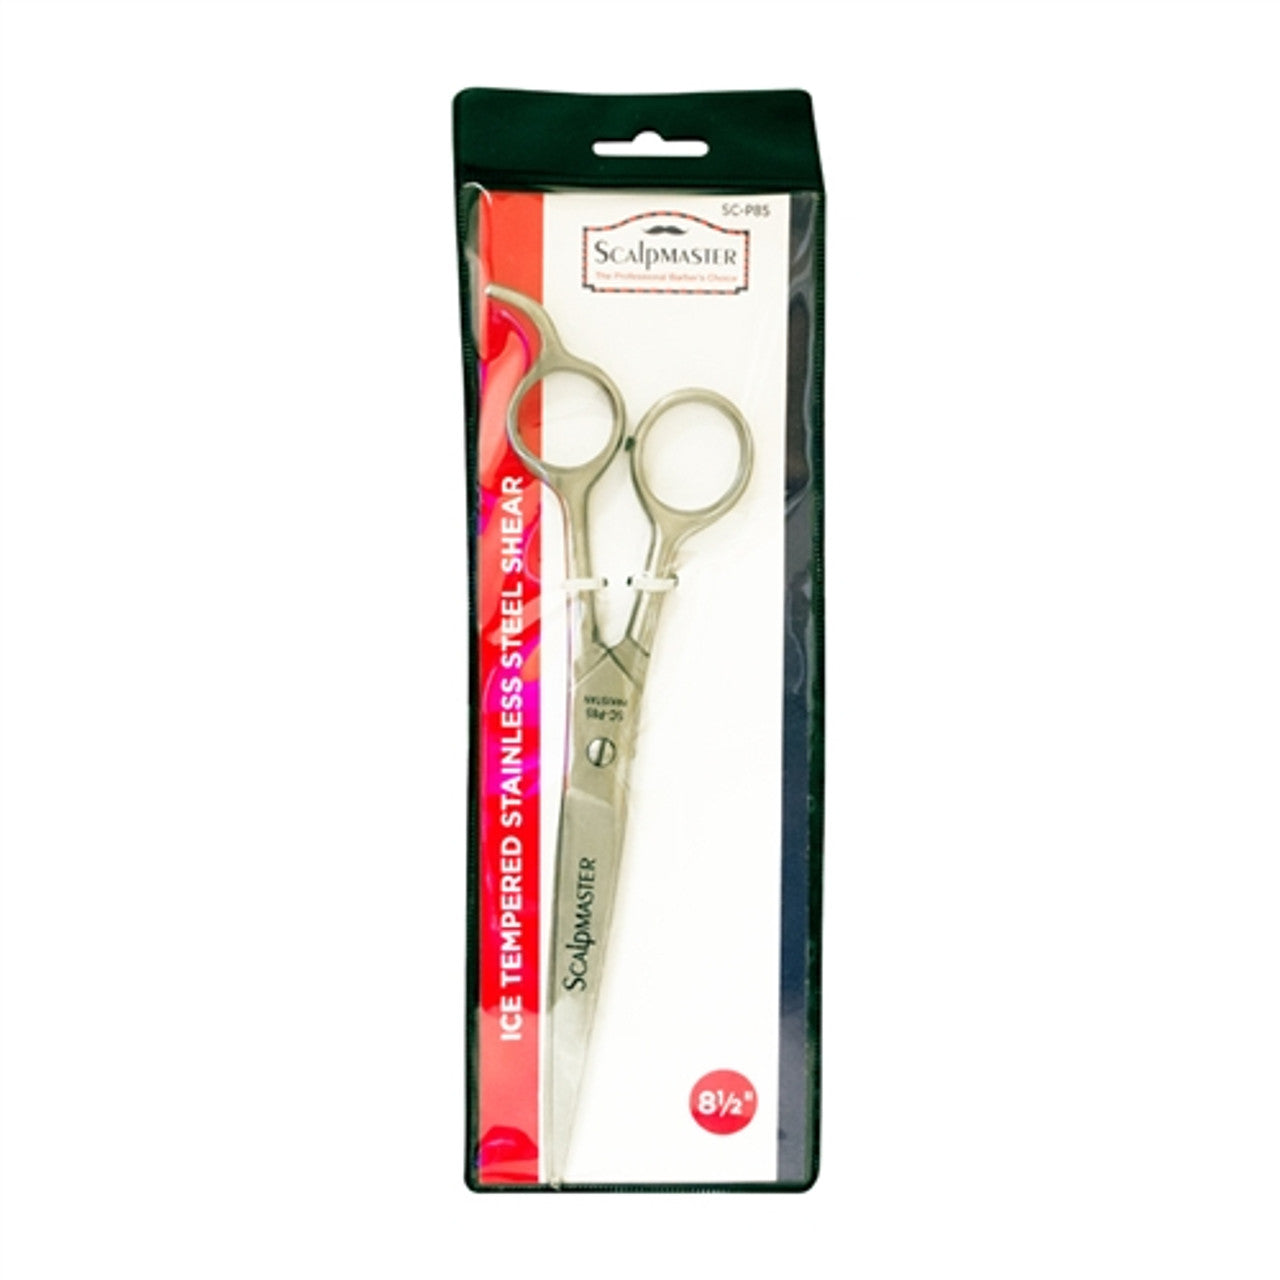 Scalpmaster Professional Ice Tempered Stainless Steel Shear - 8.5in.